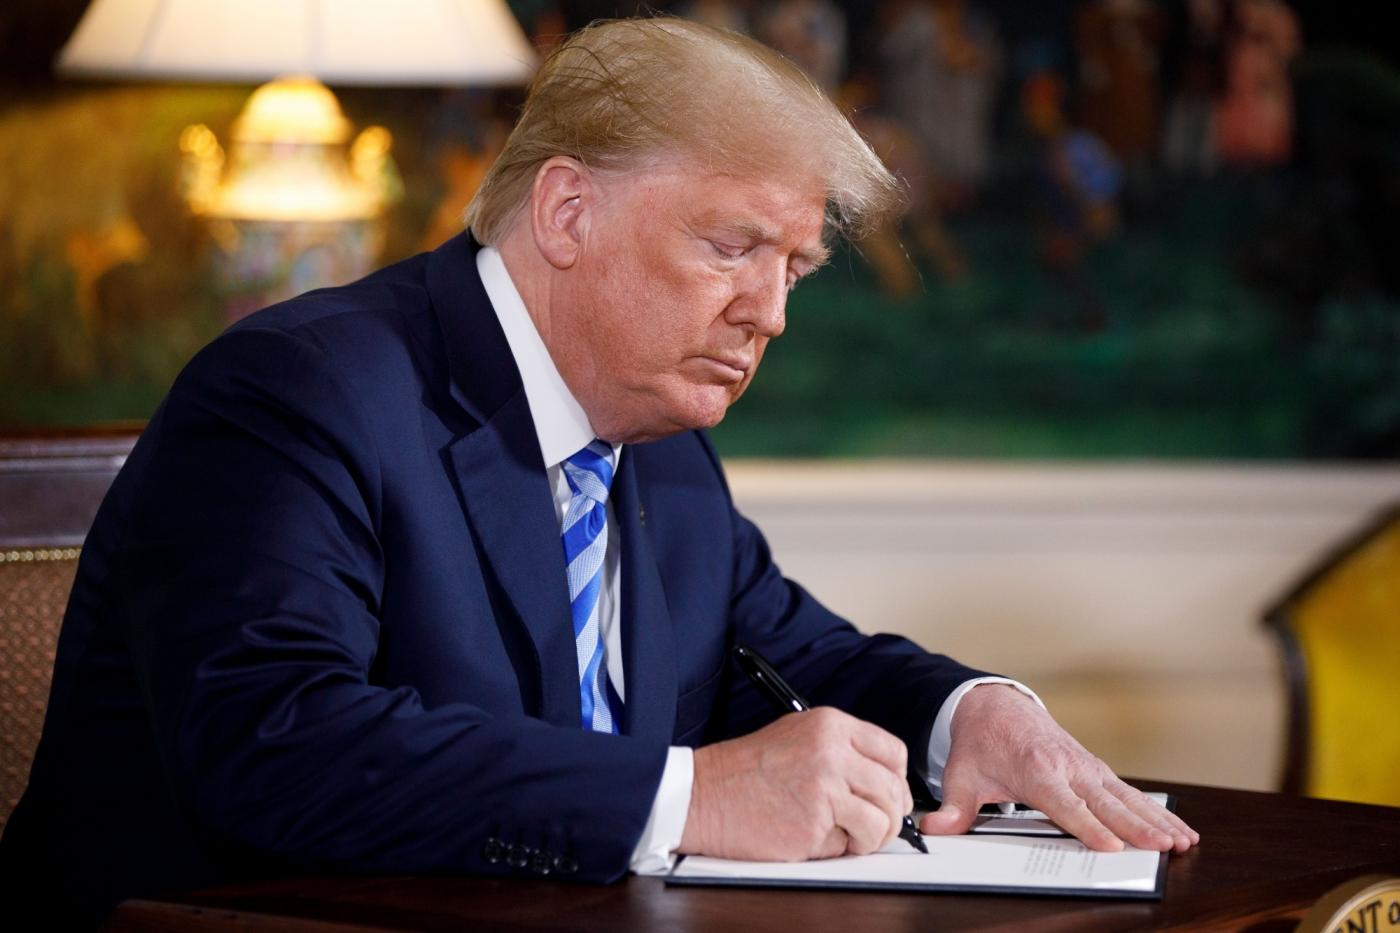 WASHINGTON, May 8, 2018 (Xinhua) -- U.S. President Donald Trump signs a presidential memorandum at the White House in Washington D.C., the United States, on May 8, 2018. U.S. President Donald Trump said here on Tuesday that the United States will withdraw from the Iran nuclear deal, a landmark agreement signed in 2015. (Xinhua/Ting Shen/IANS) by . 